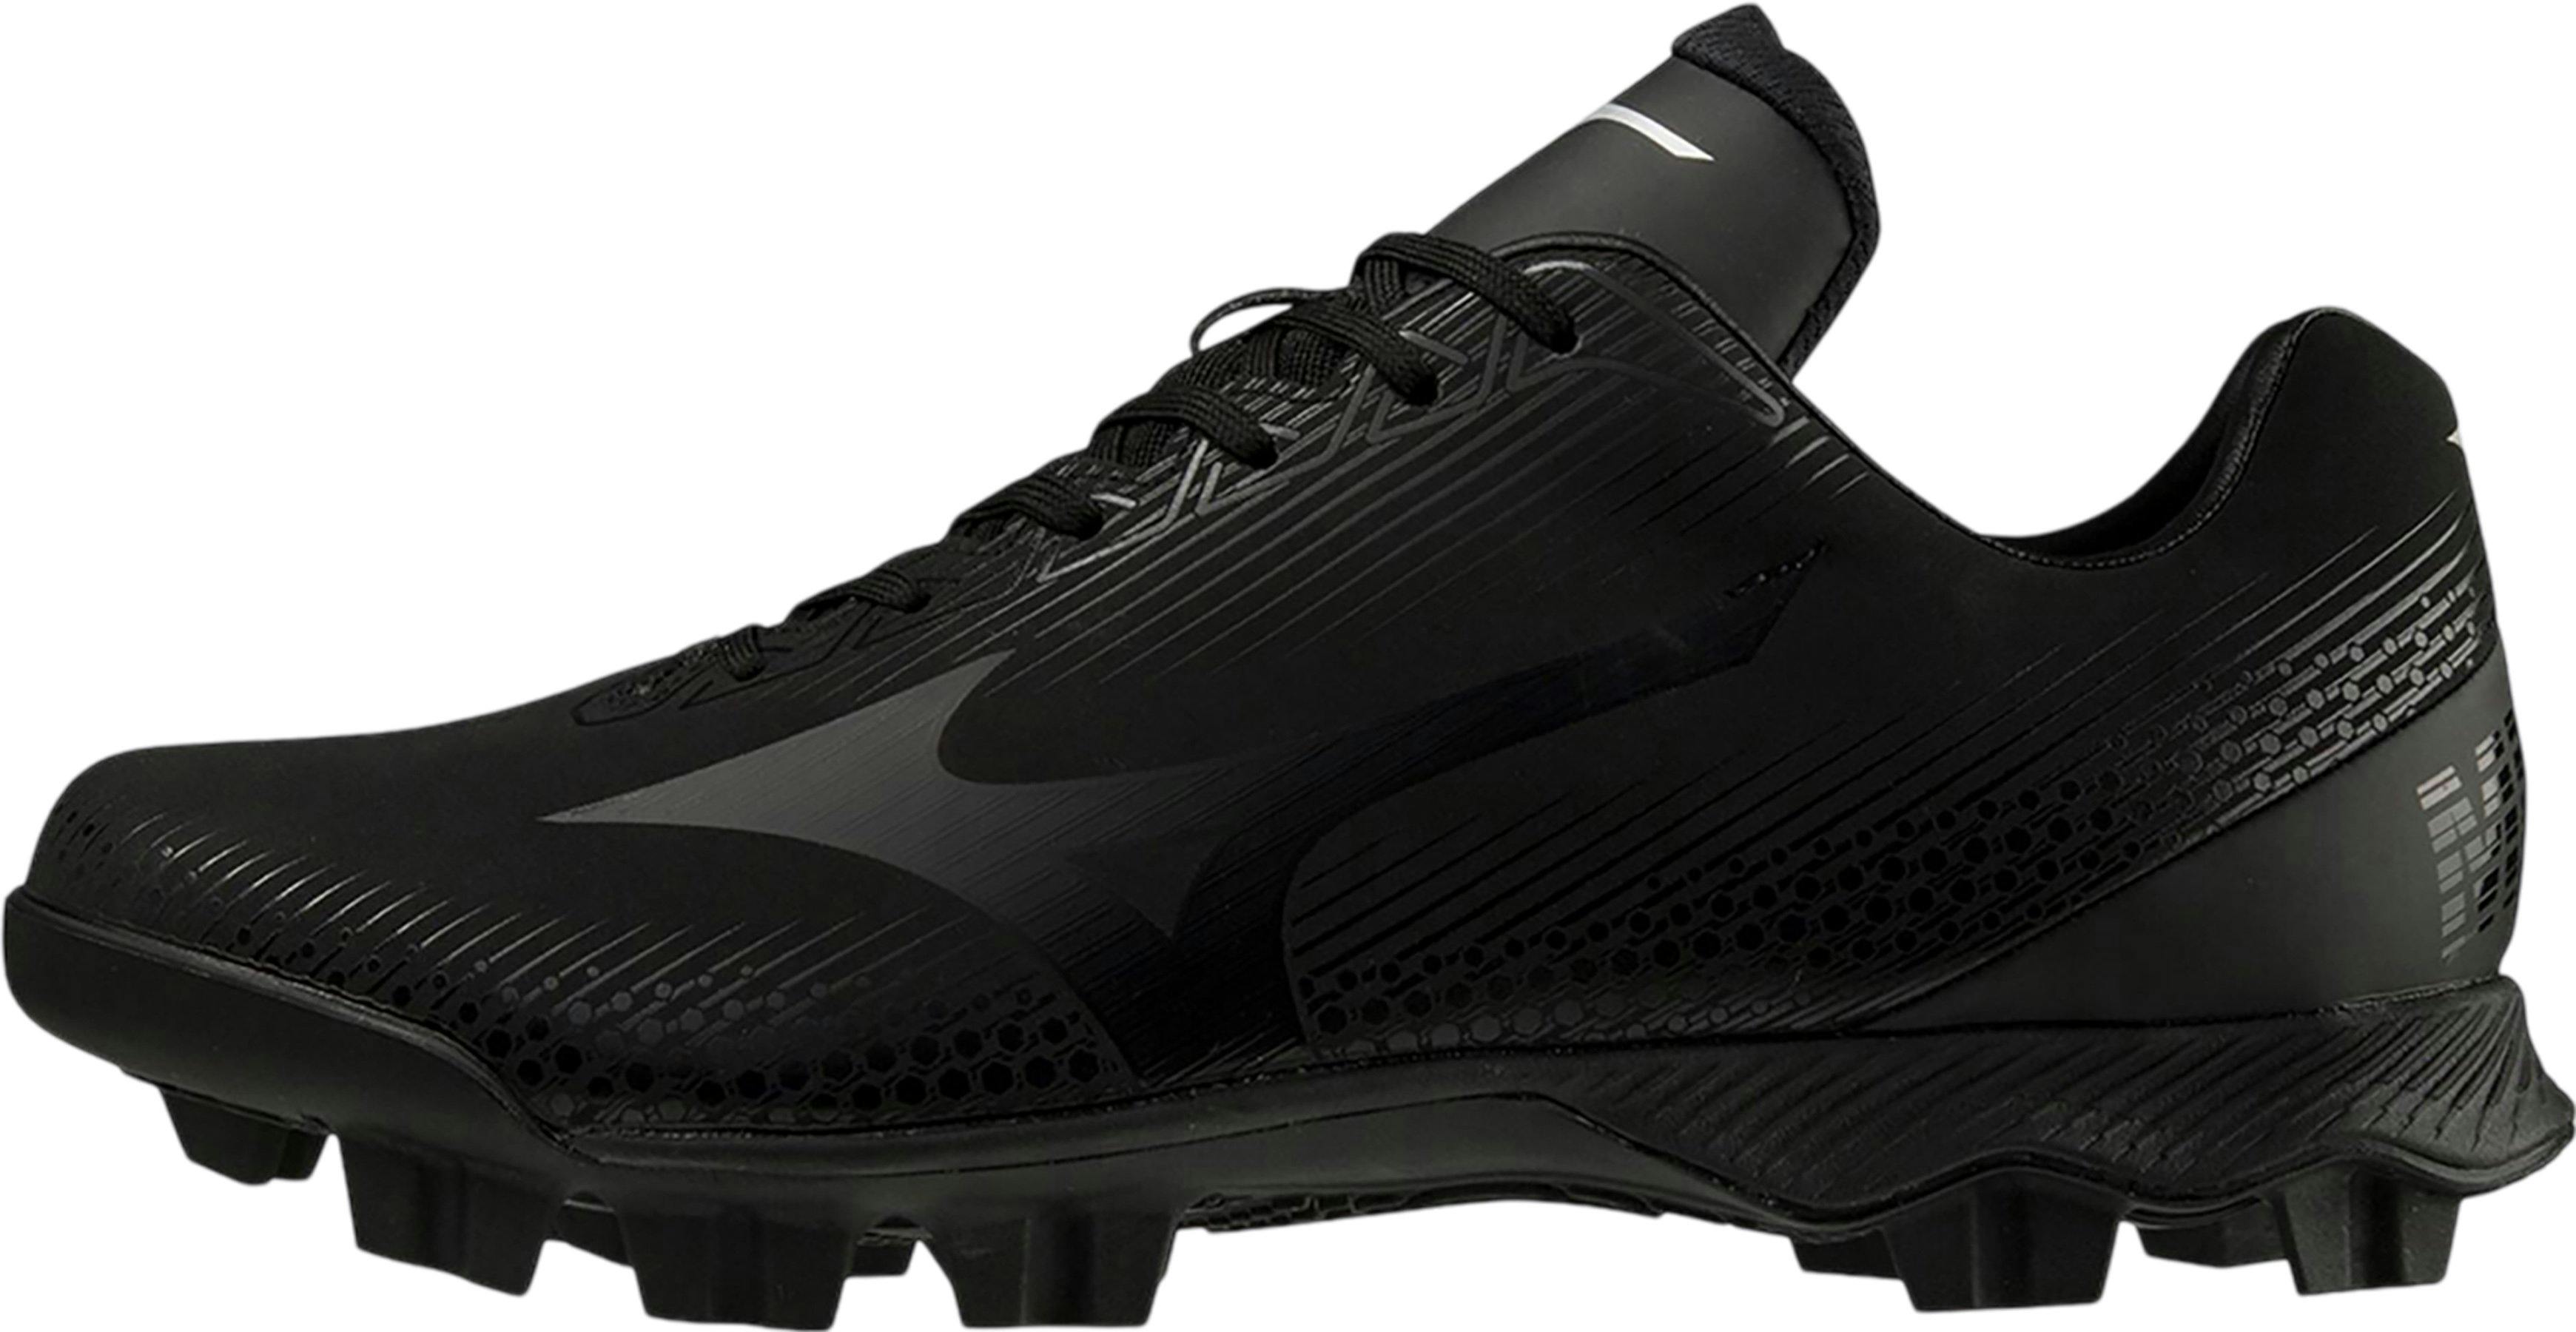 Product image for Mizuno Wave LightRevo TPU Molded Low Baseball Cleat Shoes - Men's